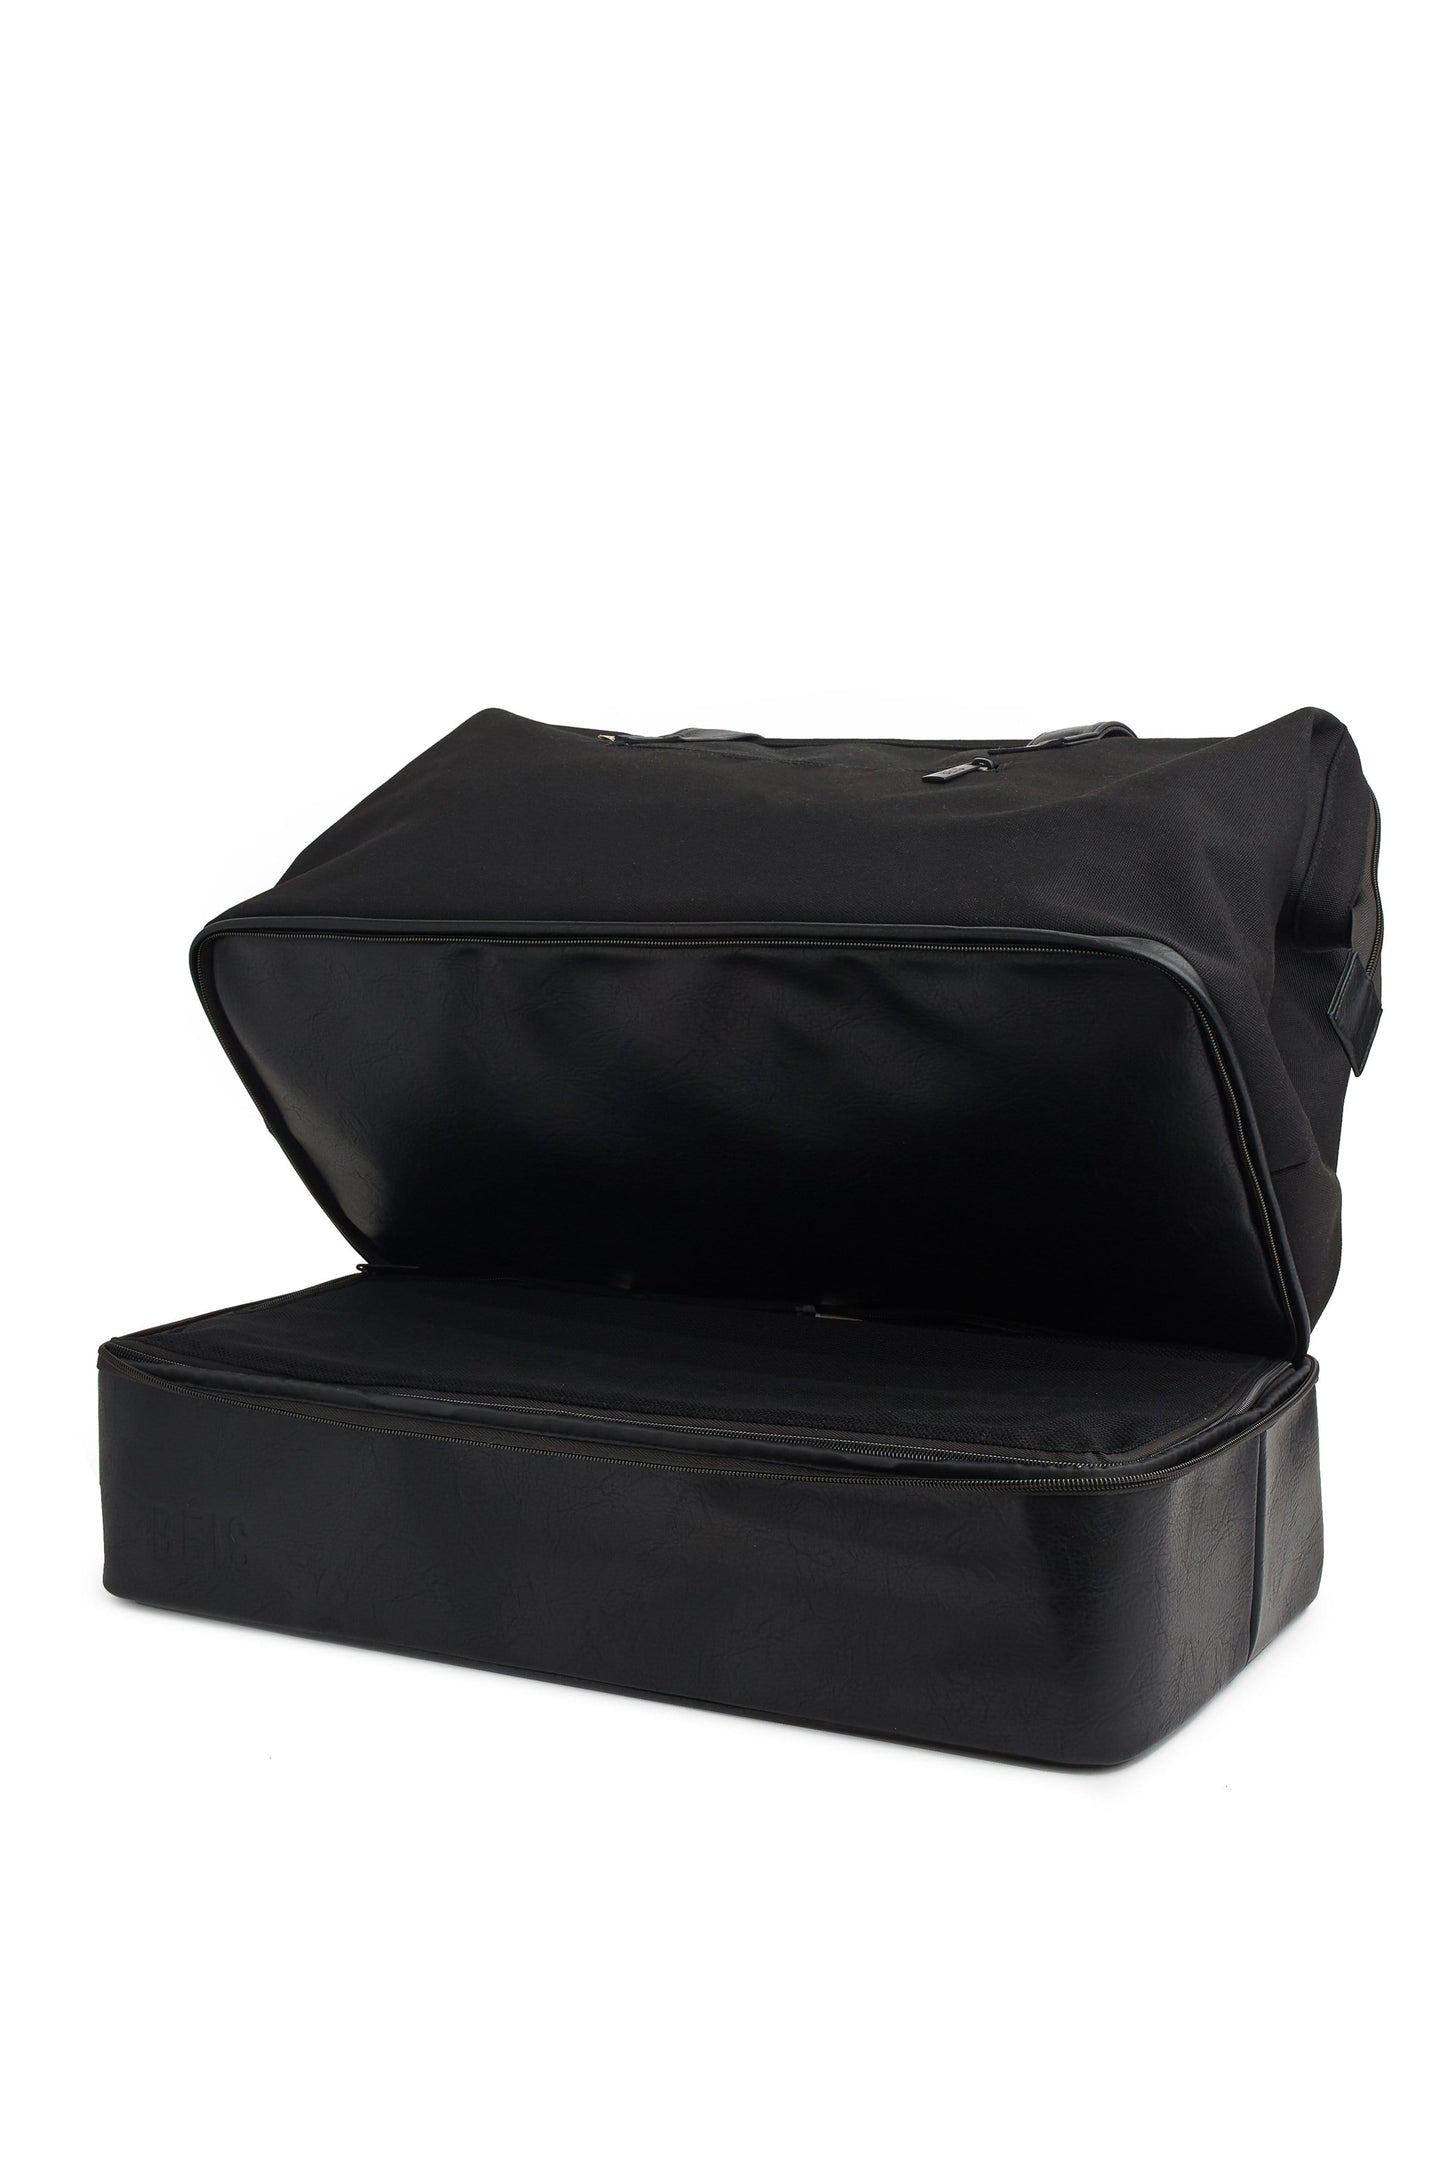 Convertible Weekender Black Removable Compartment Unzipped